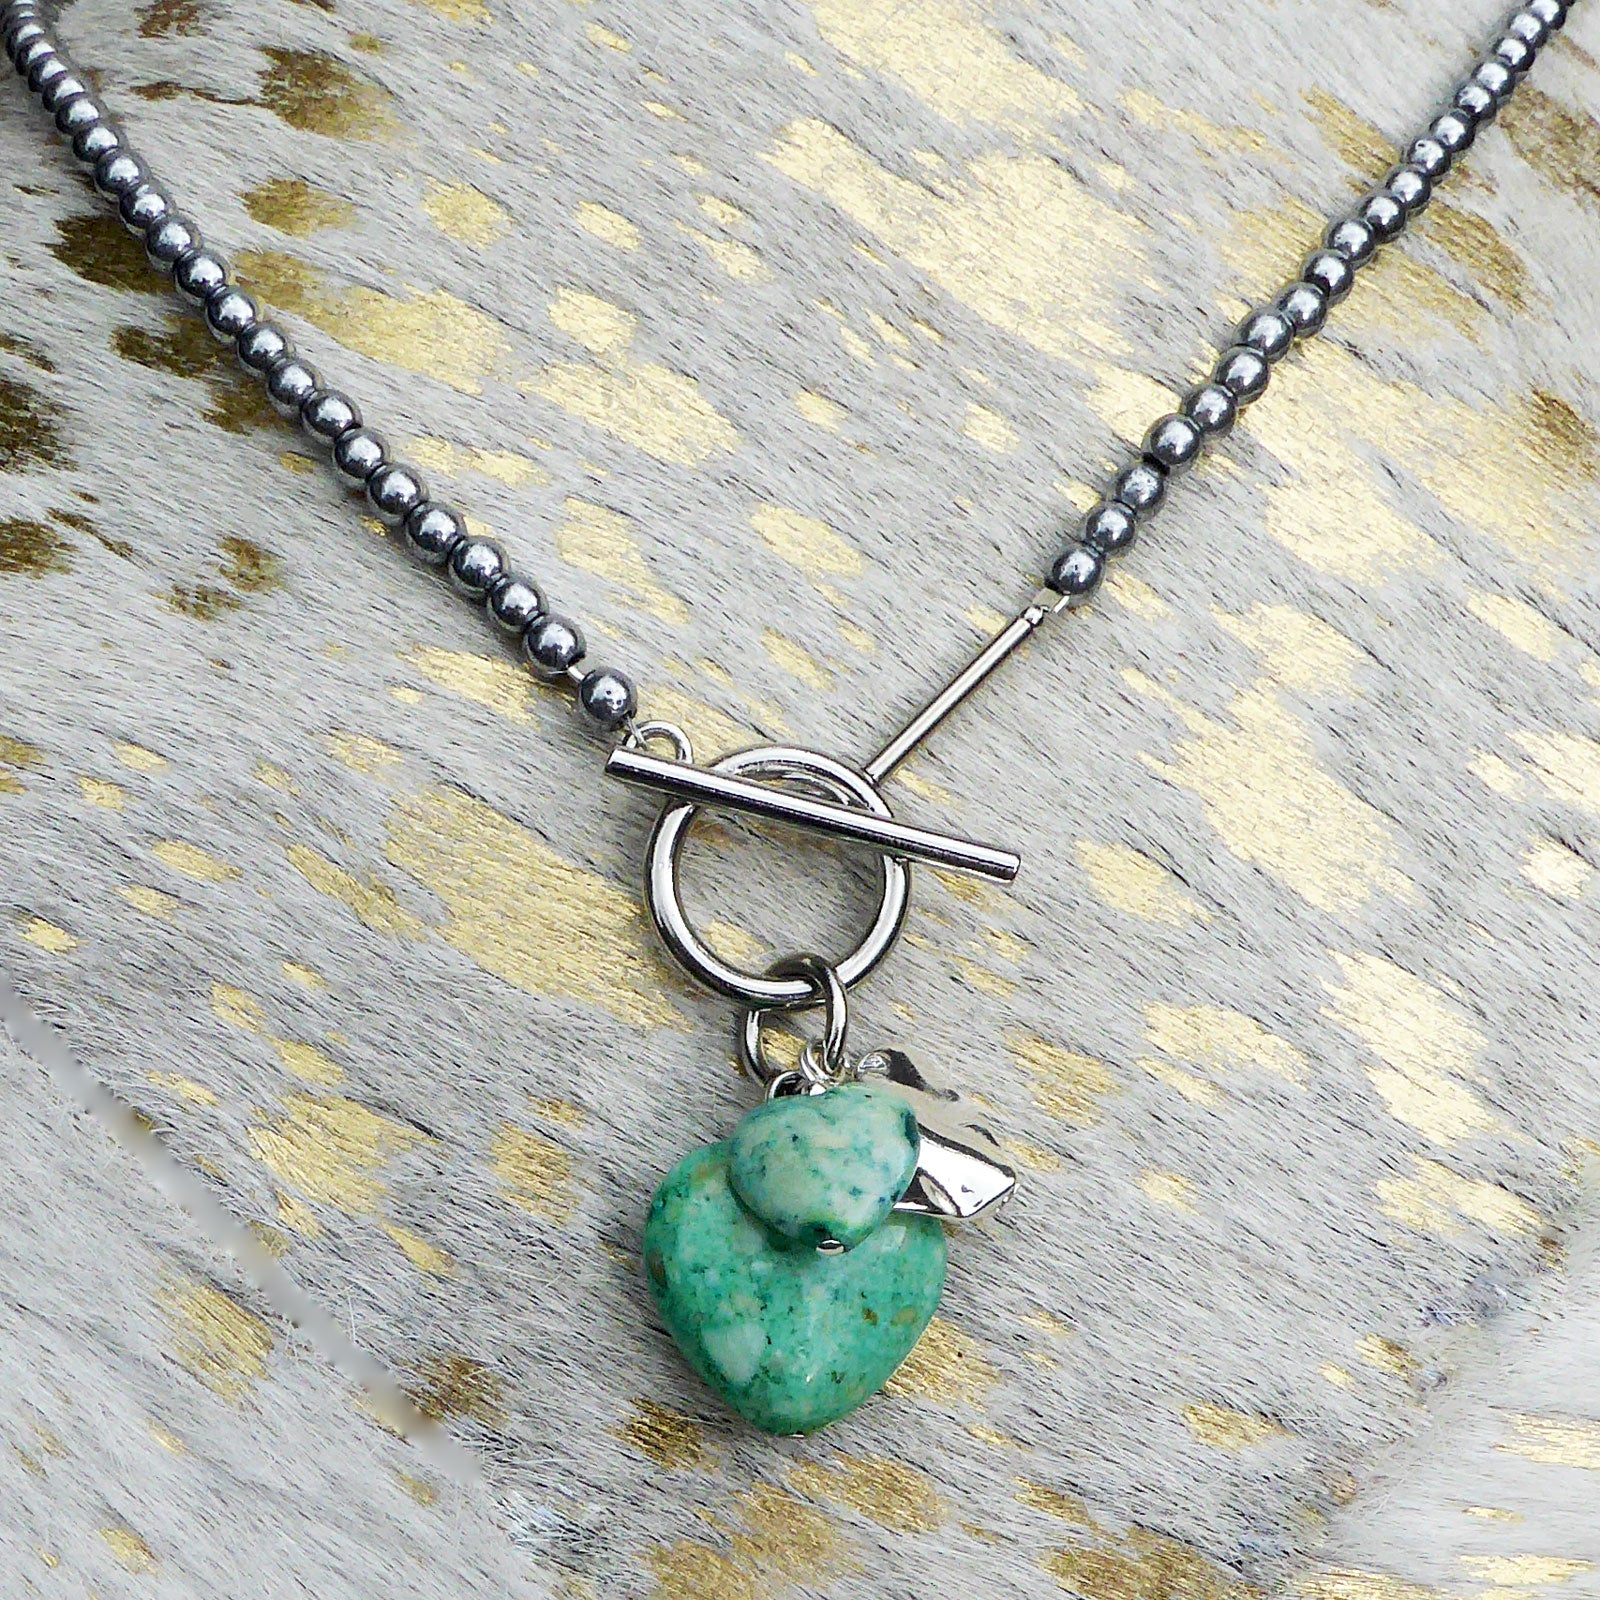 Green fossil stone charms necklace